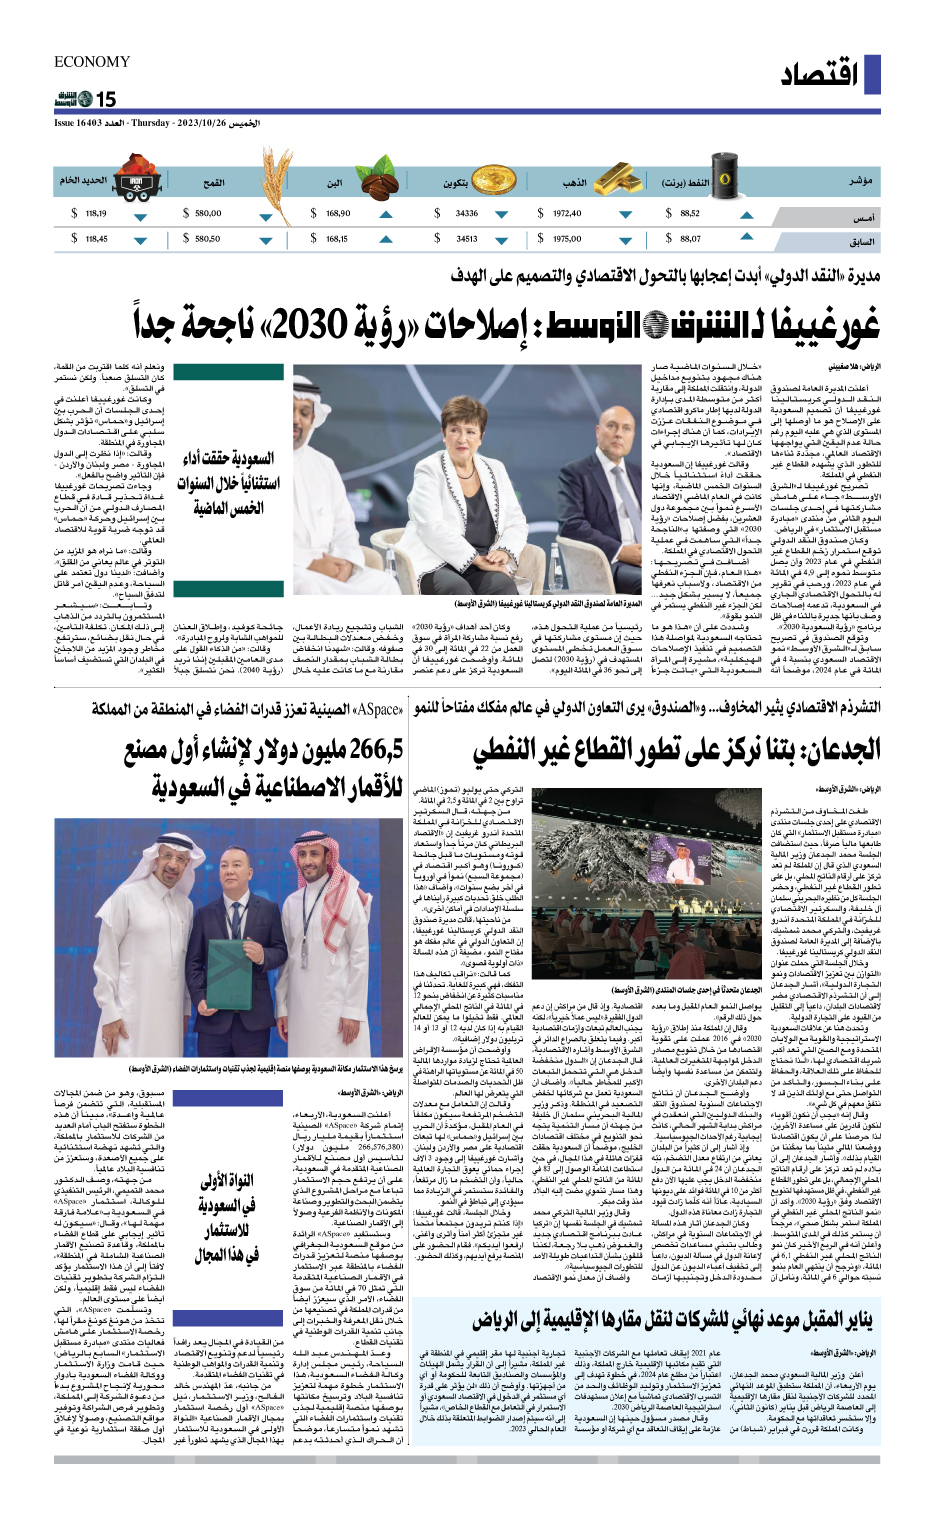 Over 50 KSA and Middle East Media Report on ASPACE